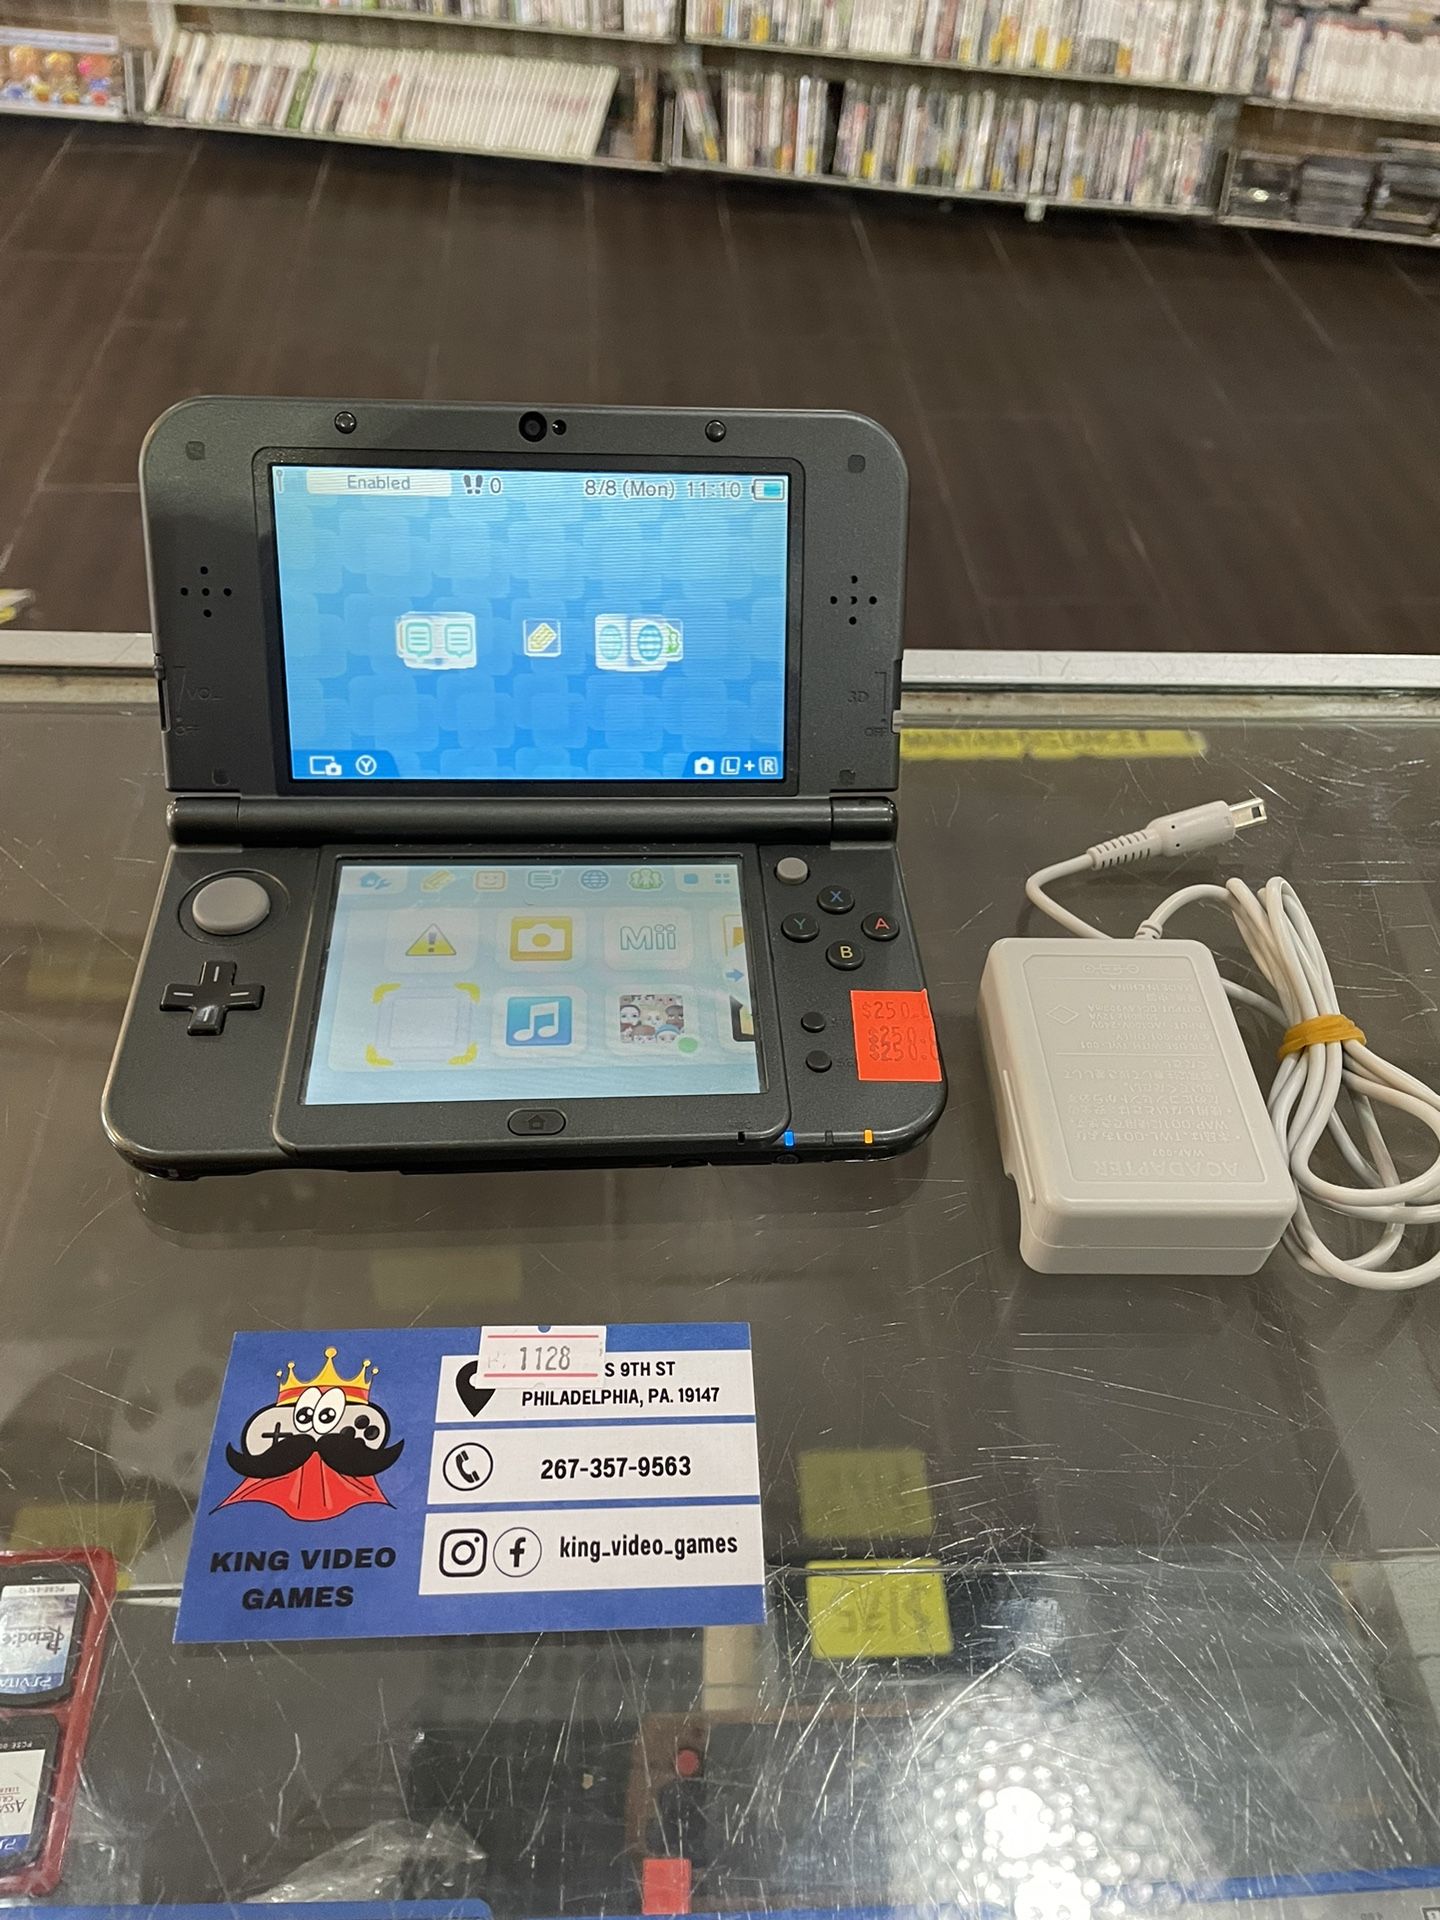 New Nintendo 3DS With Charger 